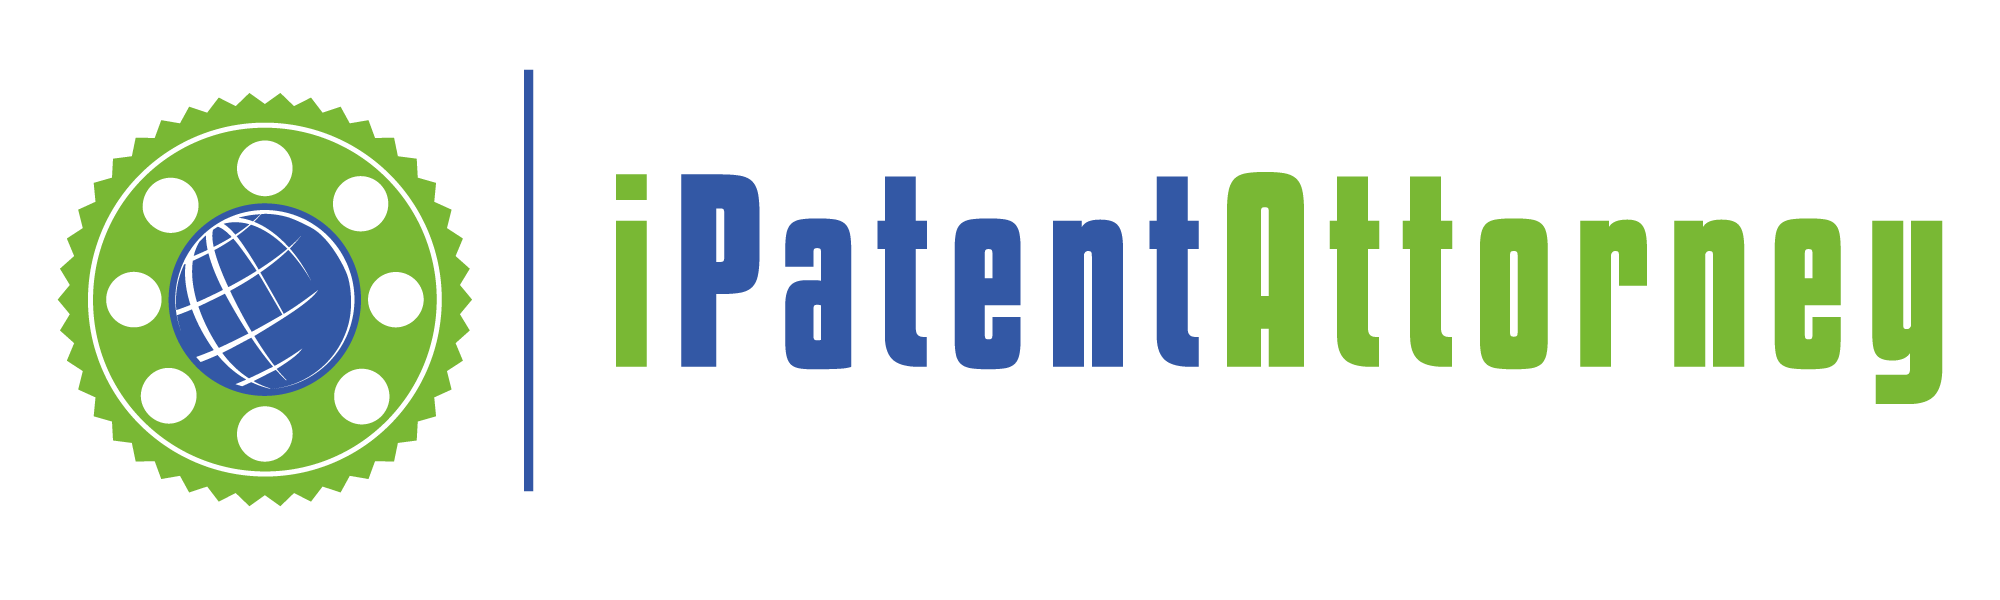 Online Patent Law Firm | Work with us from anywhere in the United States